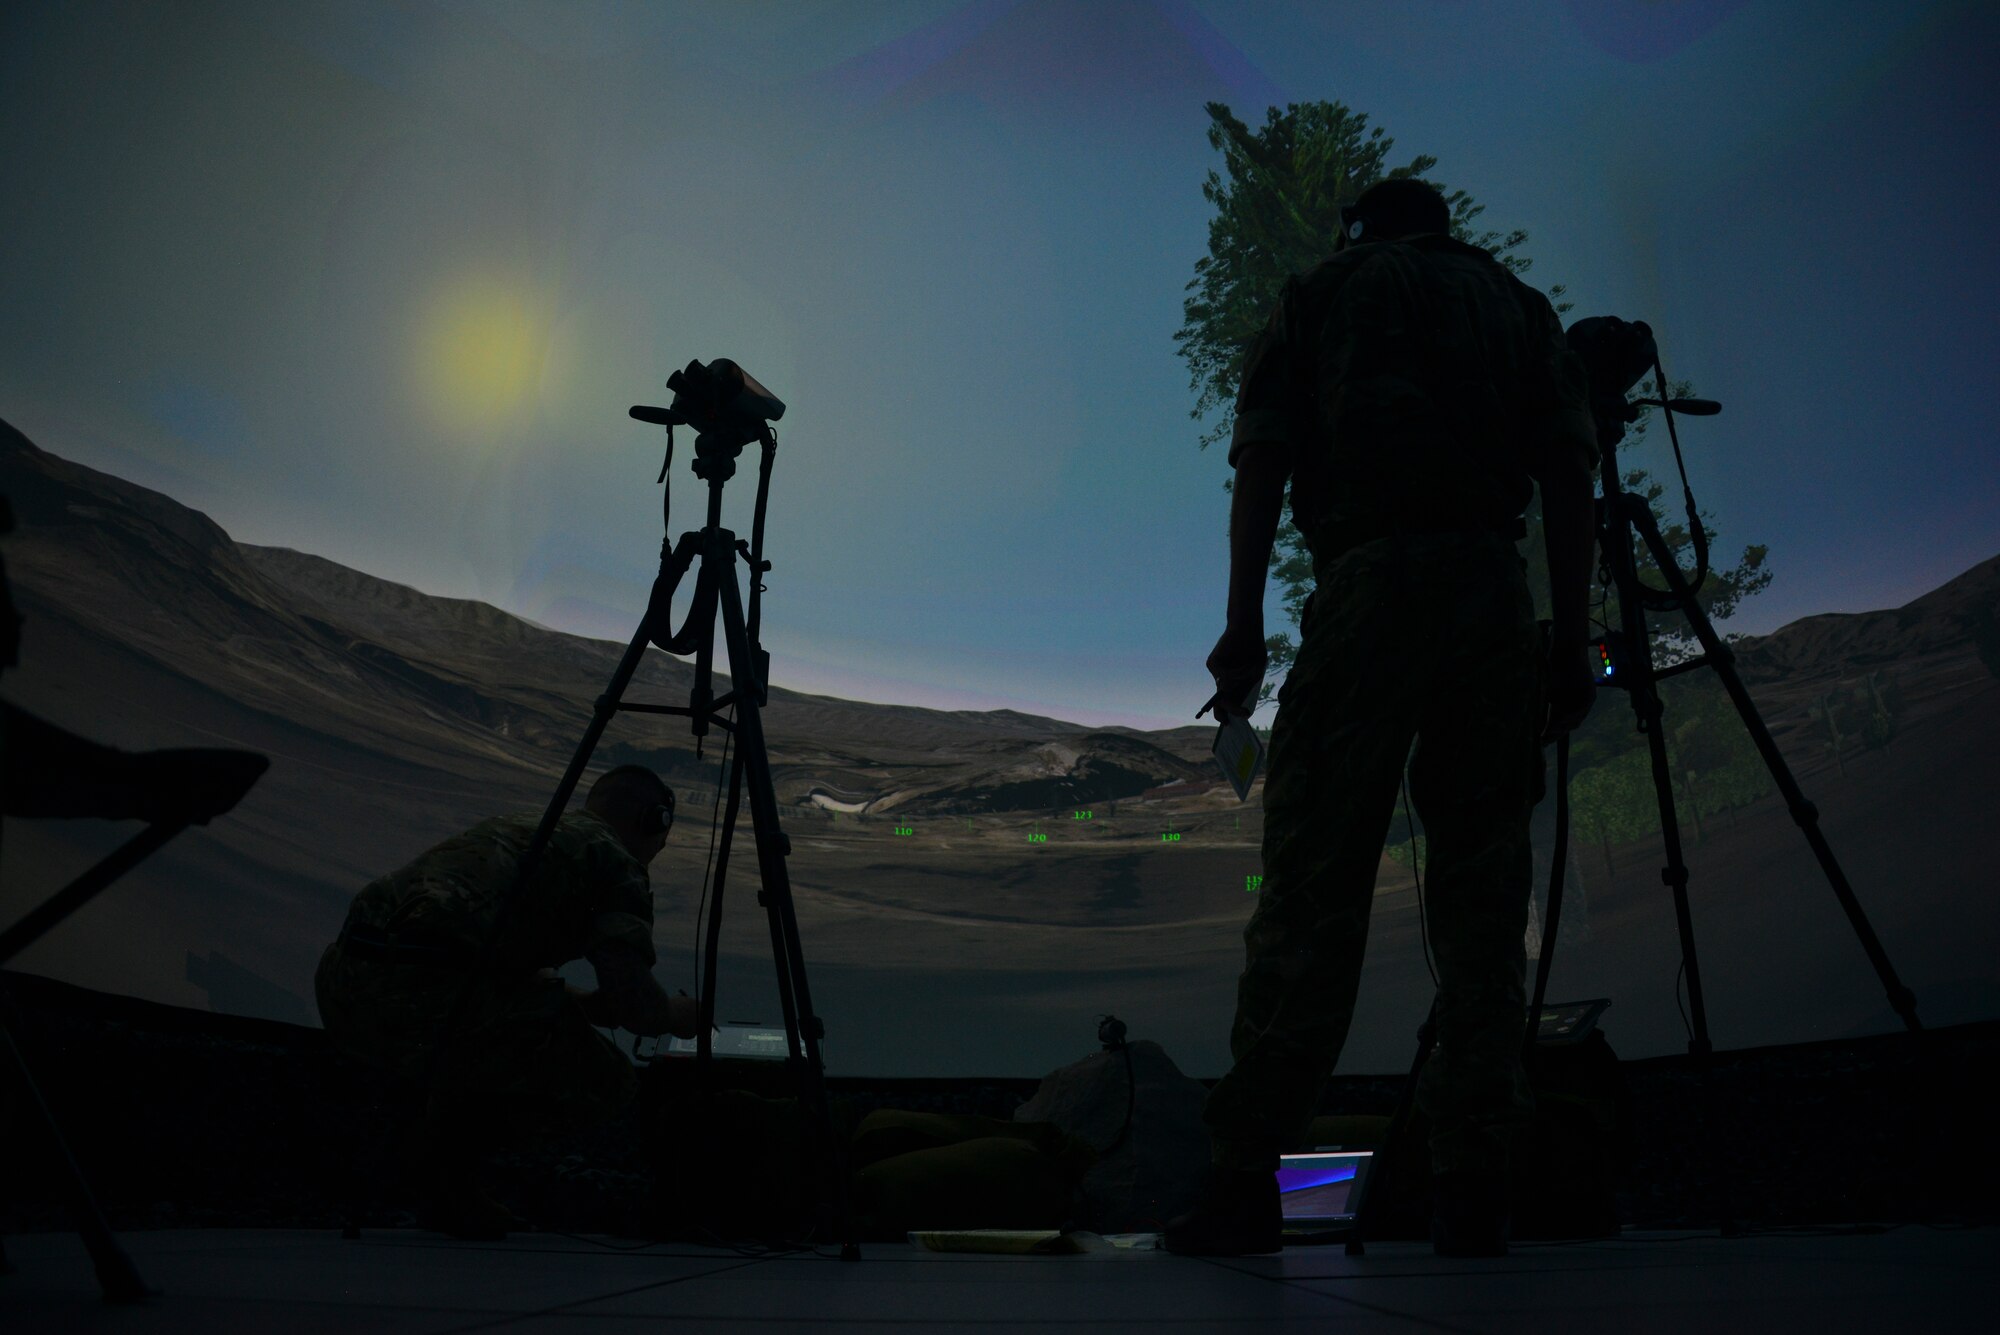 Joint Terminal Attack Controllers participate in the Exercise Coalition VIRTUAL FLAG 19-4 at Kirtland Air Force Base, N.M., Sept. 10, 2019. The 705th Combat Training Squadron, home to the Distributed Mission Operations Center, has a mission to develop, integrate and deliver capabilities and training to prepare warfighters for combat in joint and coalition environments. (U.S. Air Force photo by Staff Sgt. Kimberly Nagle)